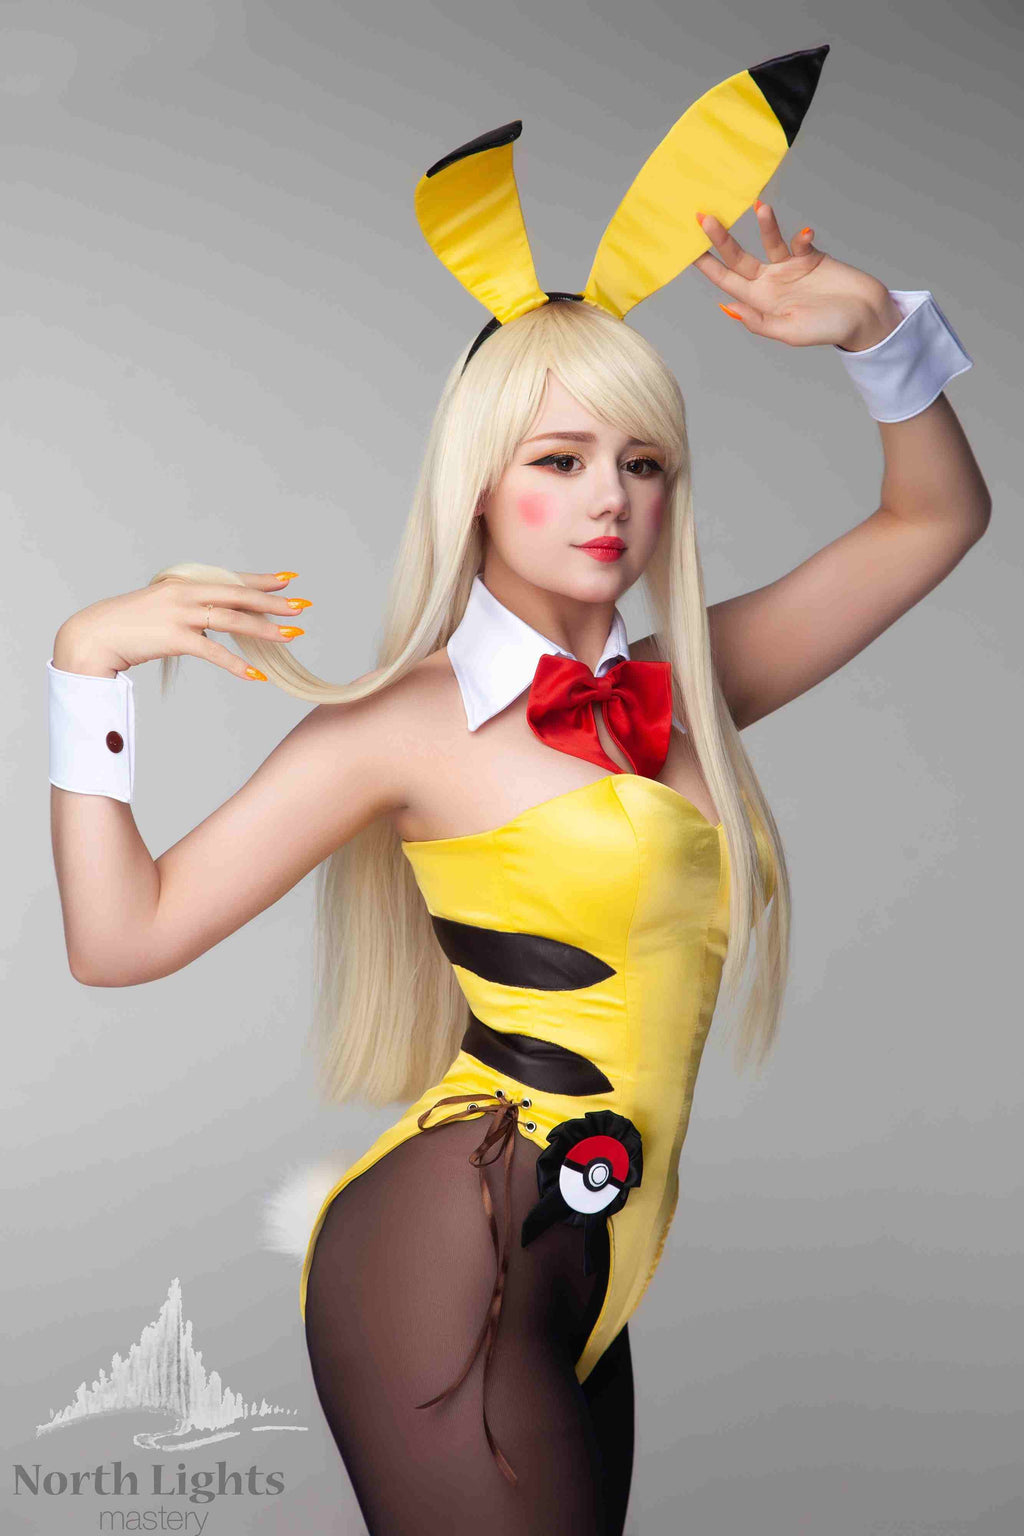 Pikachu bunny suit pikachu cosplay costume inspired by Playboy Bunny